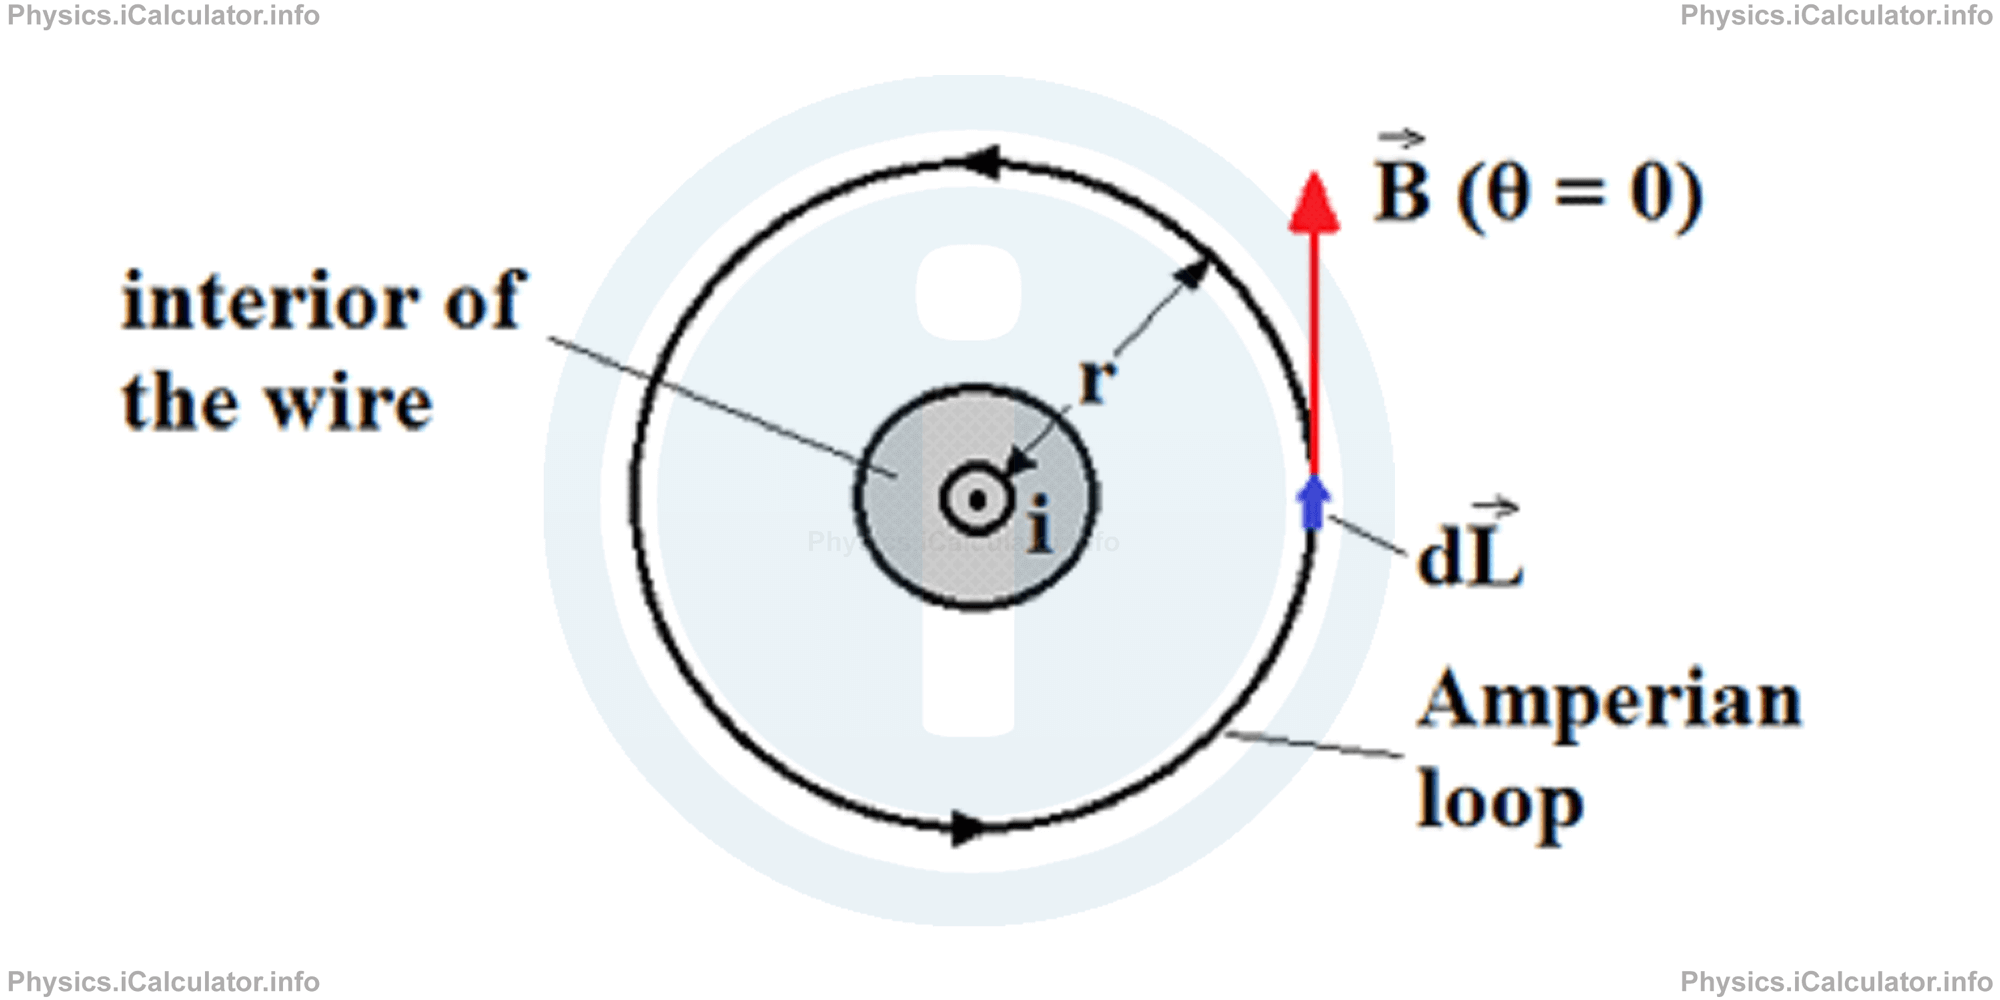 Physics Tutorials: This image provides visual information for the physics tutorial Ampere's Law 